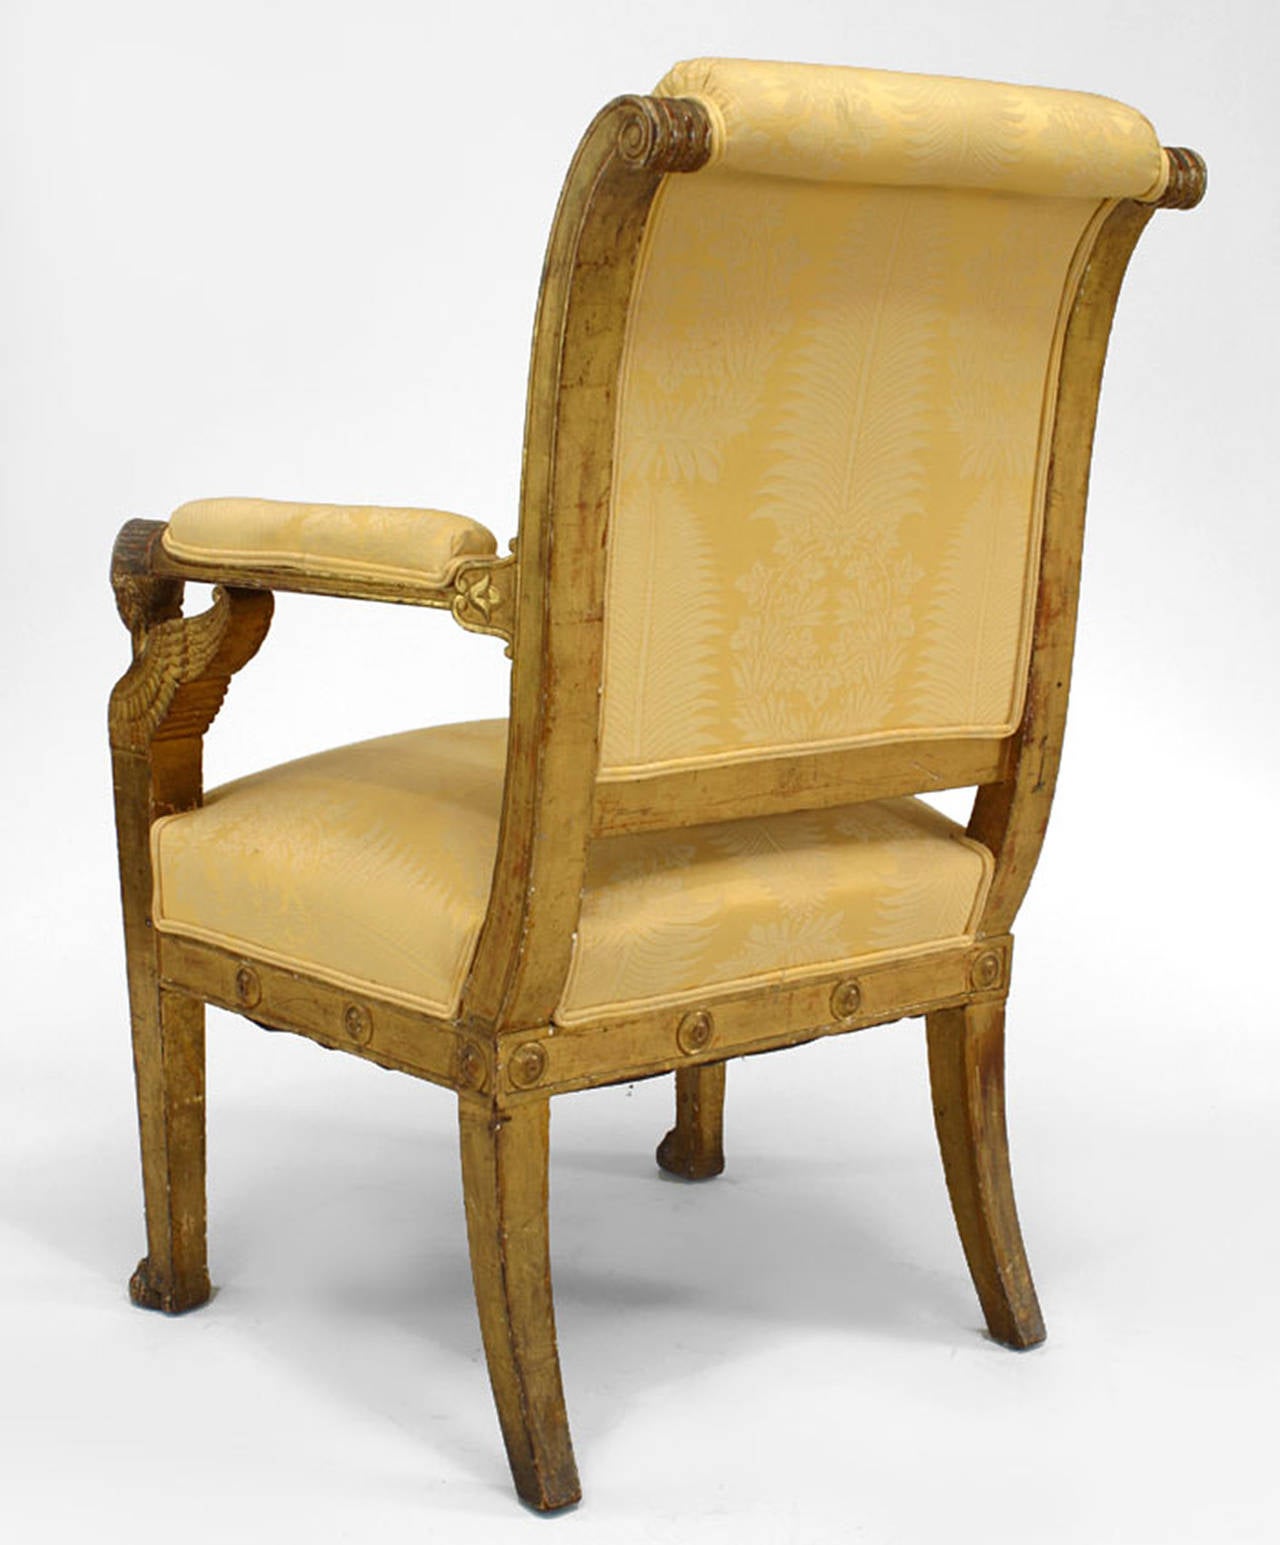 Carved French Empire Upholstered Arm Chair